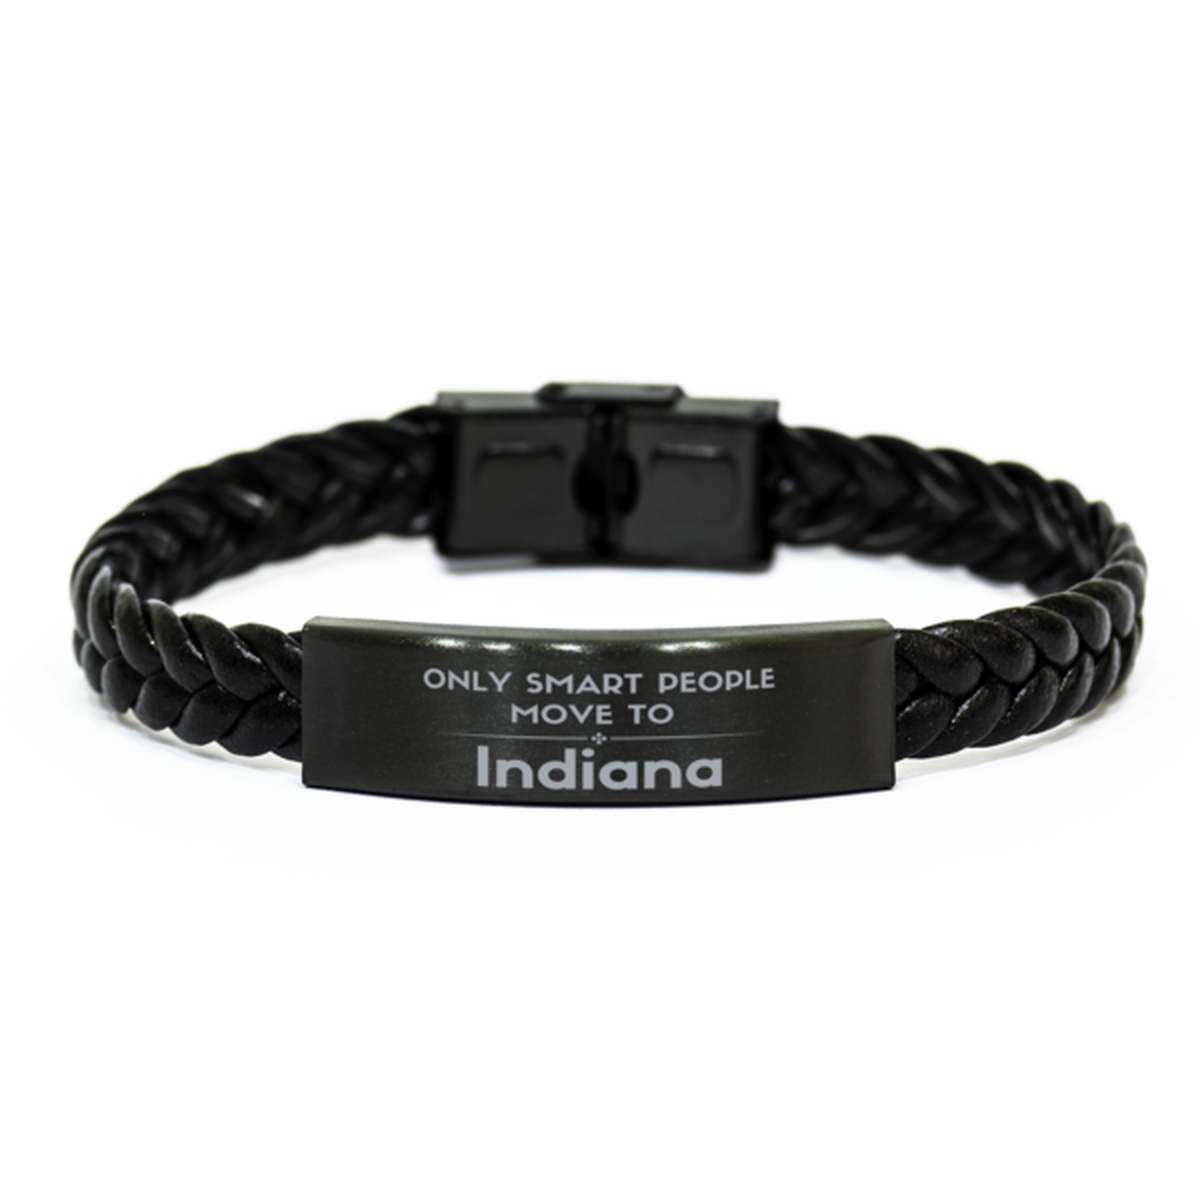 Only smart people move to Indiana Braided Leather Bracelet, Gag Gifts For Indiana, Move to Indiana Gifts for Friends Coworker Funny Saying Quote